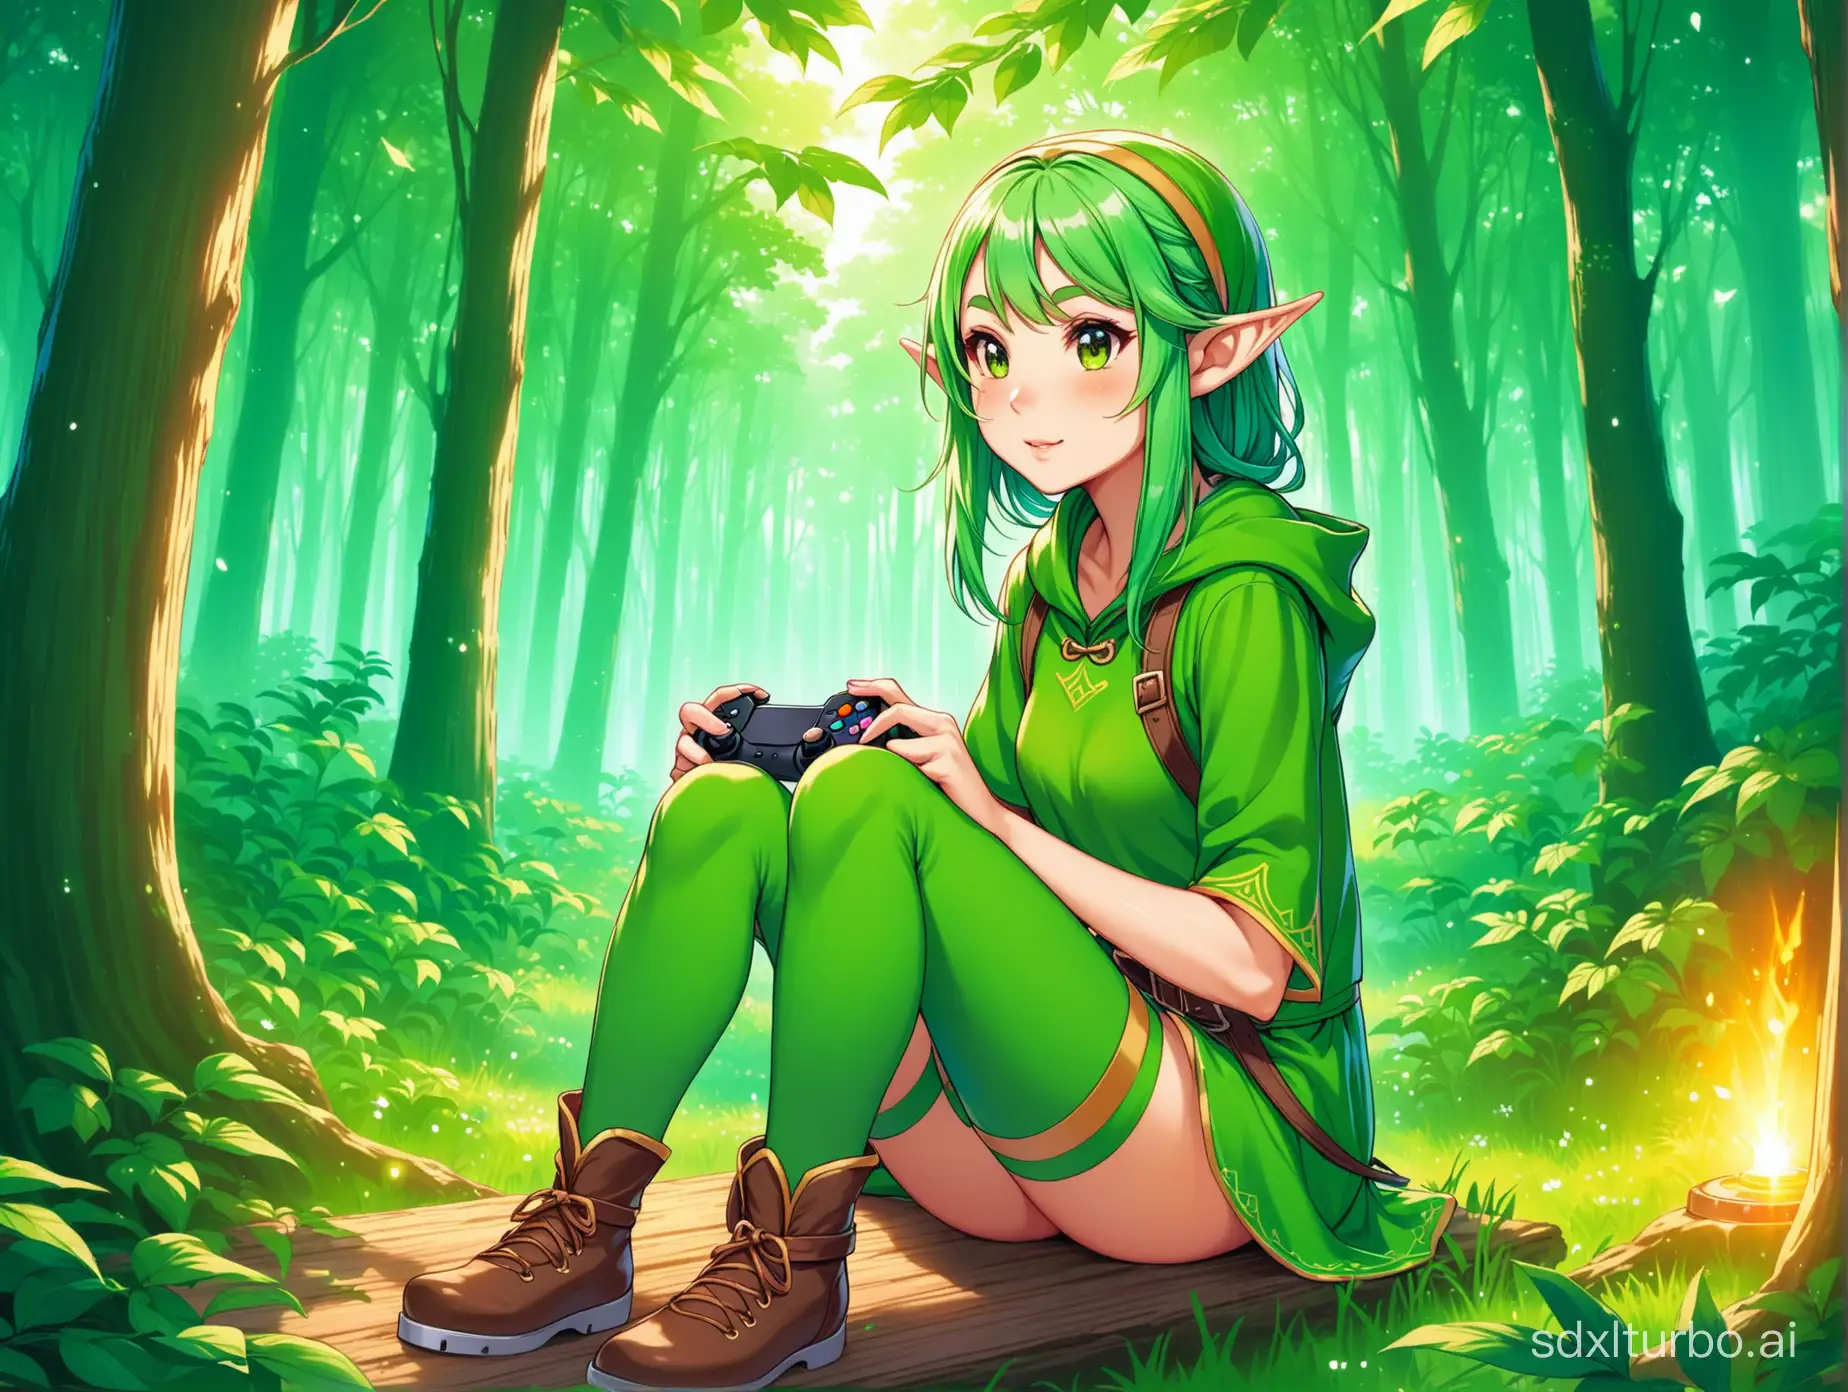 Elf-Girl-with-Green-Hair-Playing-Video-Game-in-Forest-Setting